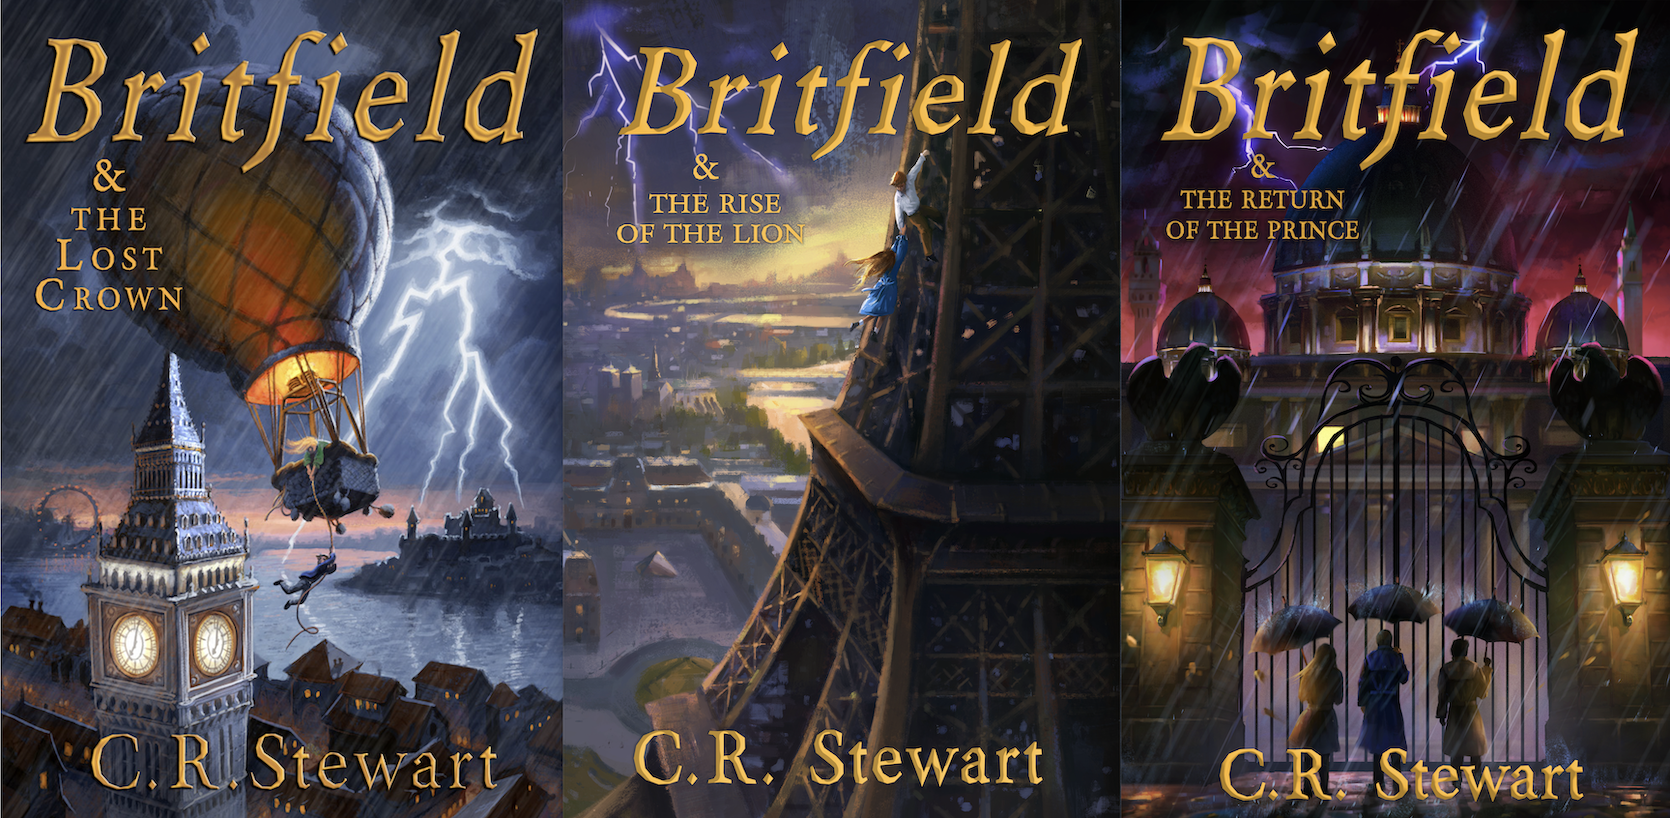 Covers of three Britfield novels: Britfield and the Lost Crown, Britfield and the Rise of the Lion, Britfield and the Return of the Prince